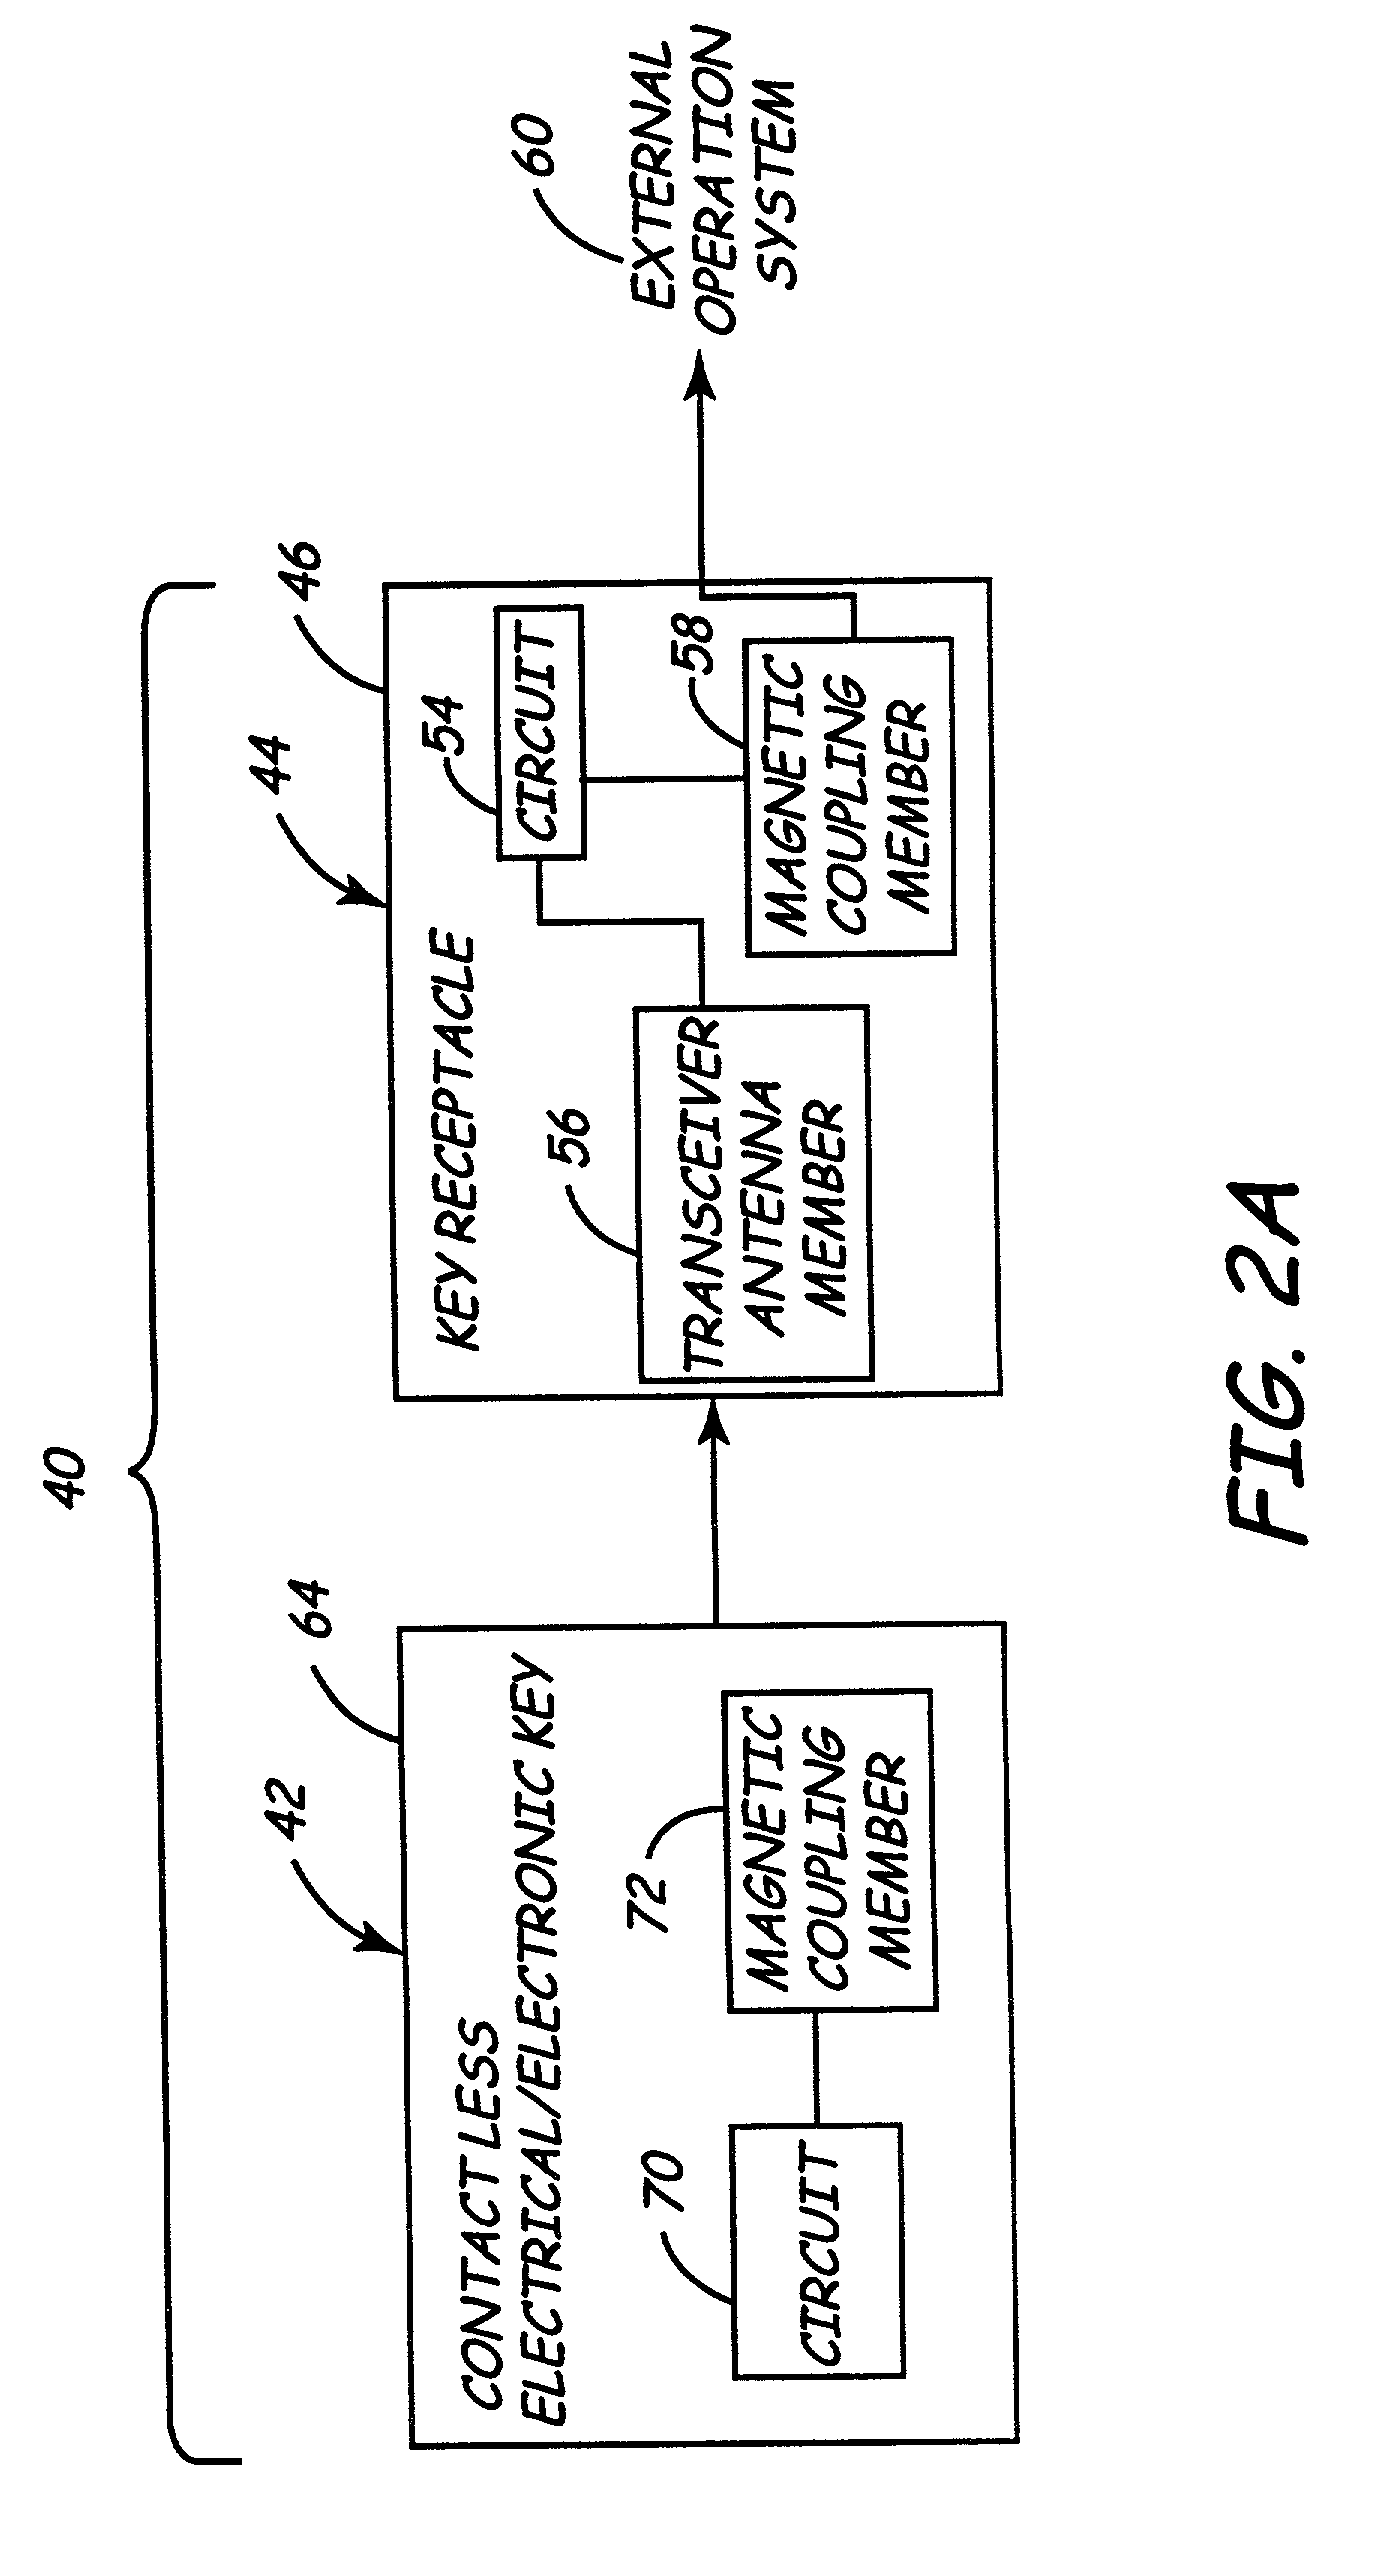 Electronic key system and method